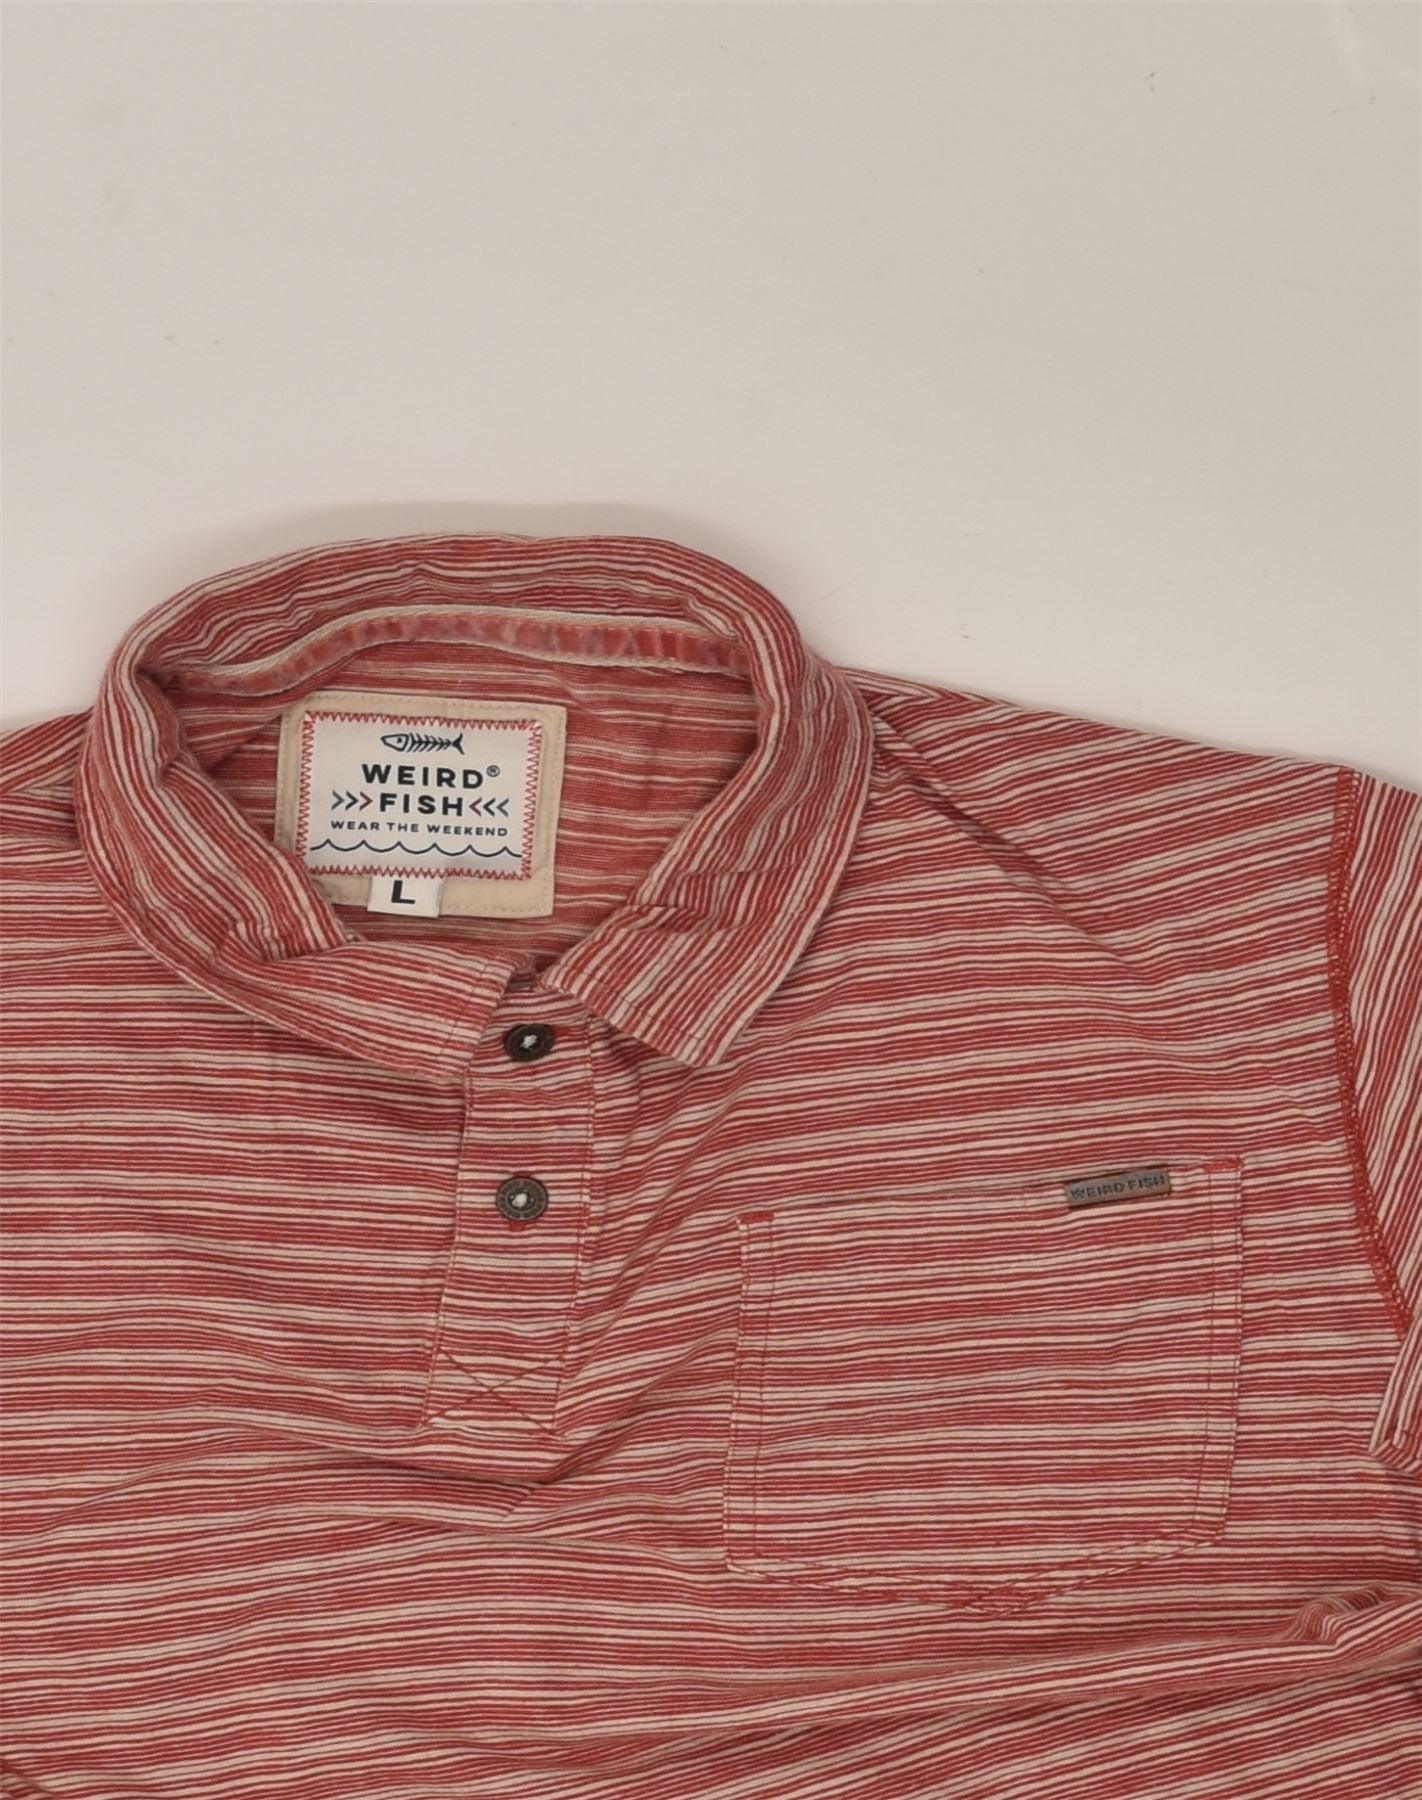 WEIRD FISH Mens Polo Shirt Large Red Striped Cotton, Vintage & Second-Hand Clothing  Online